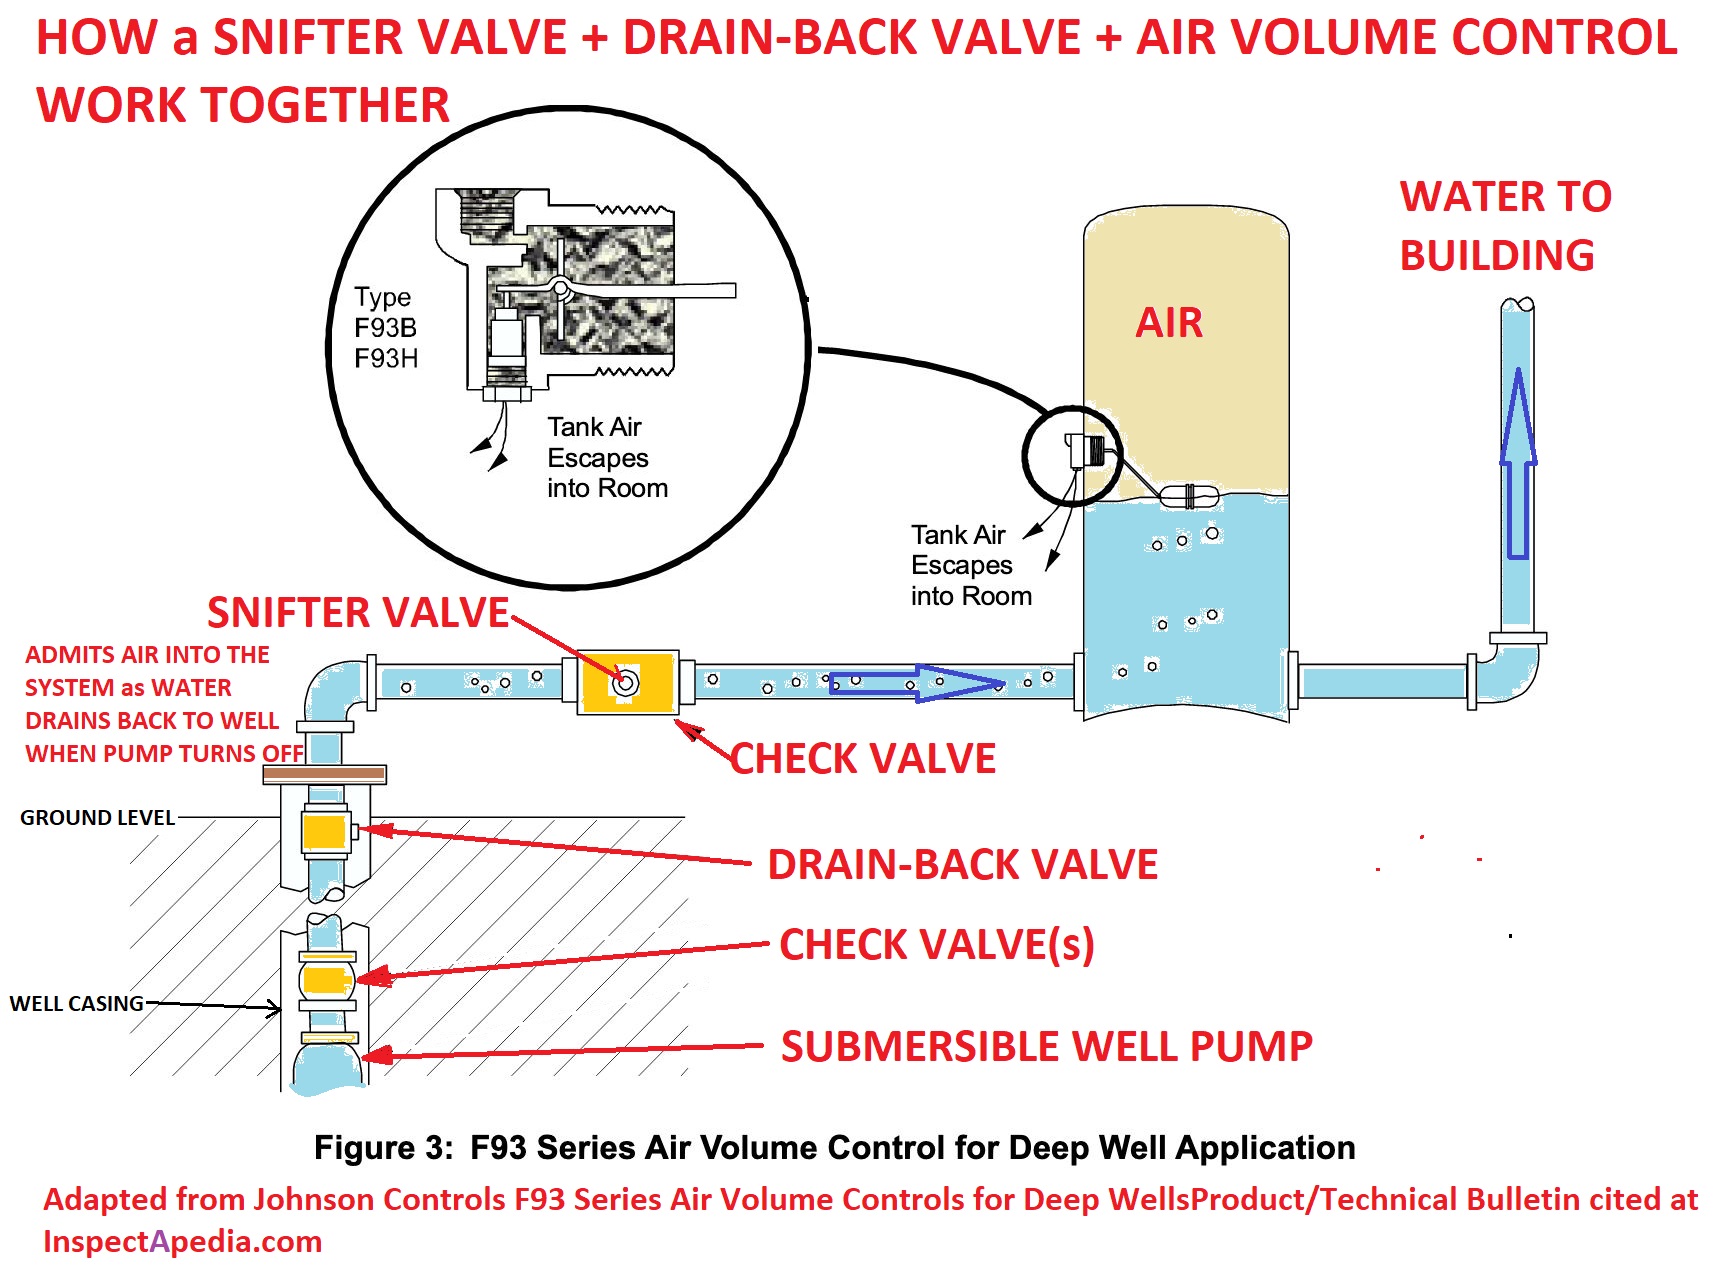 Drain Valve & Snifter Valve Operation. How a Snifter Valve Drain-Back Valve Work with an Air Volume Control Provide Well Pipe Freeze & Air Injection